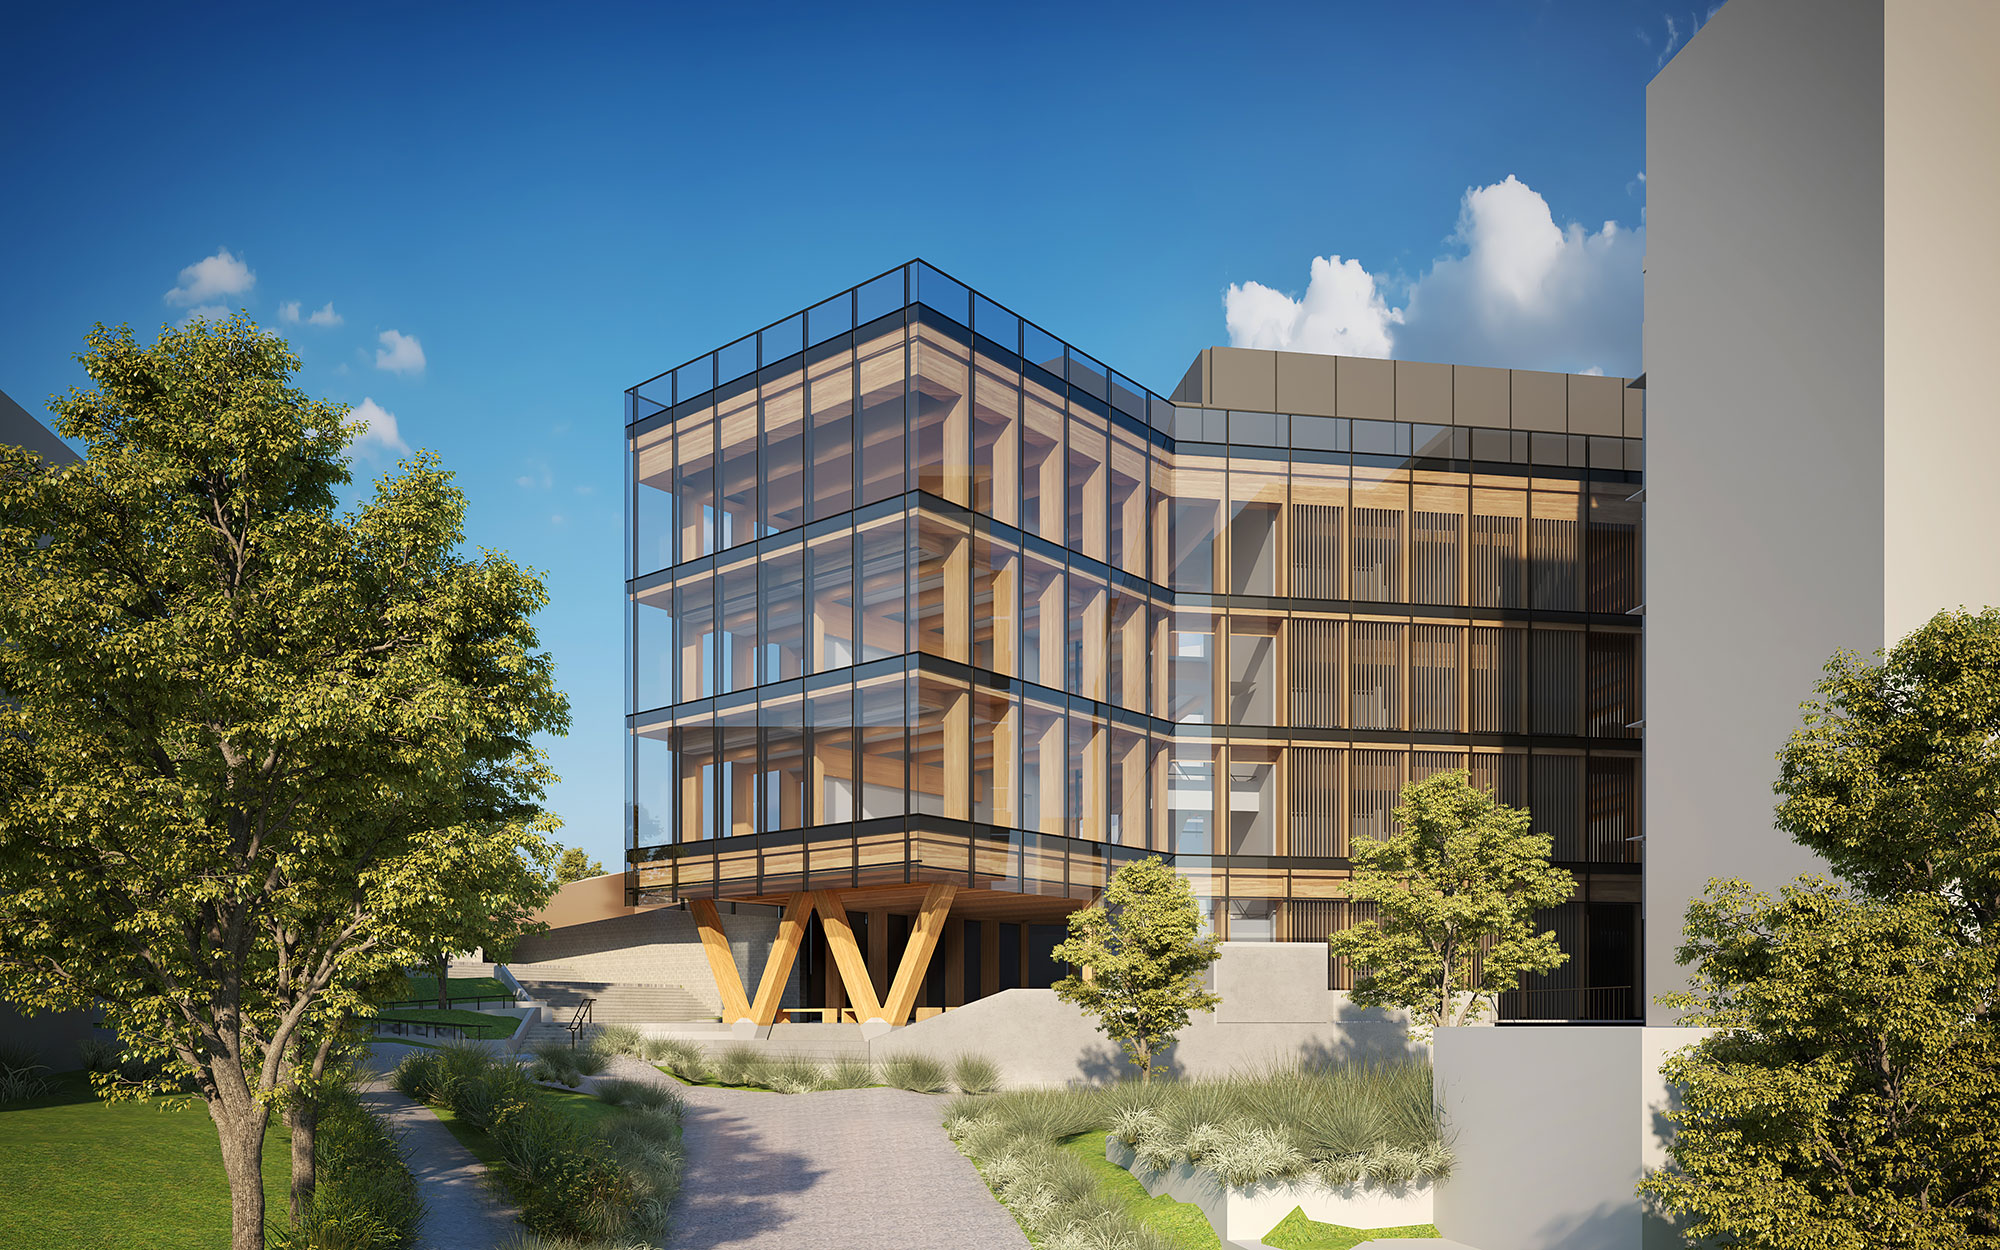 DfMA - render image of the completed Macquarie University Clinical Education building